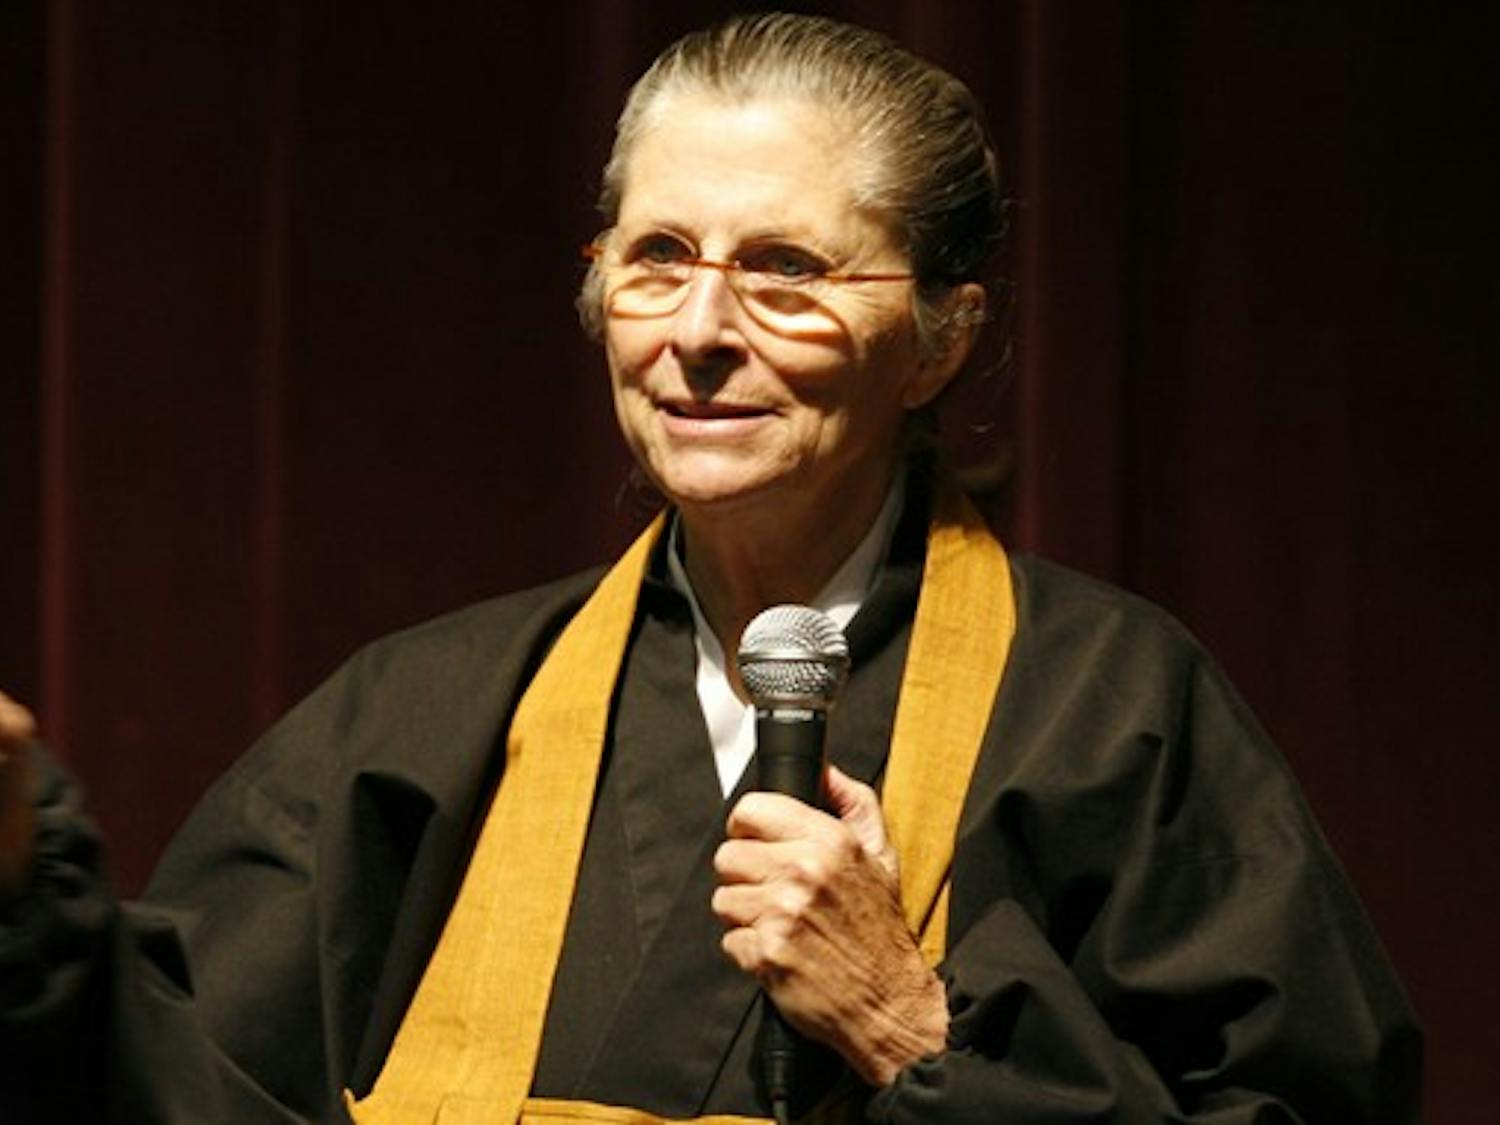 Duke Chapel’s Faith Council and the Buddhist community at Duke hosted Joan Halifax Tuesday night at Griffith Theater for a talk titled “Living in a World of Radical Uncertainty.”